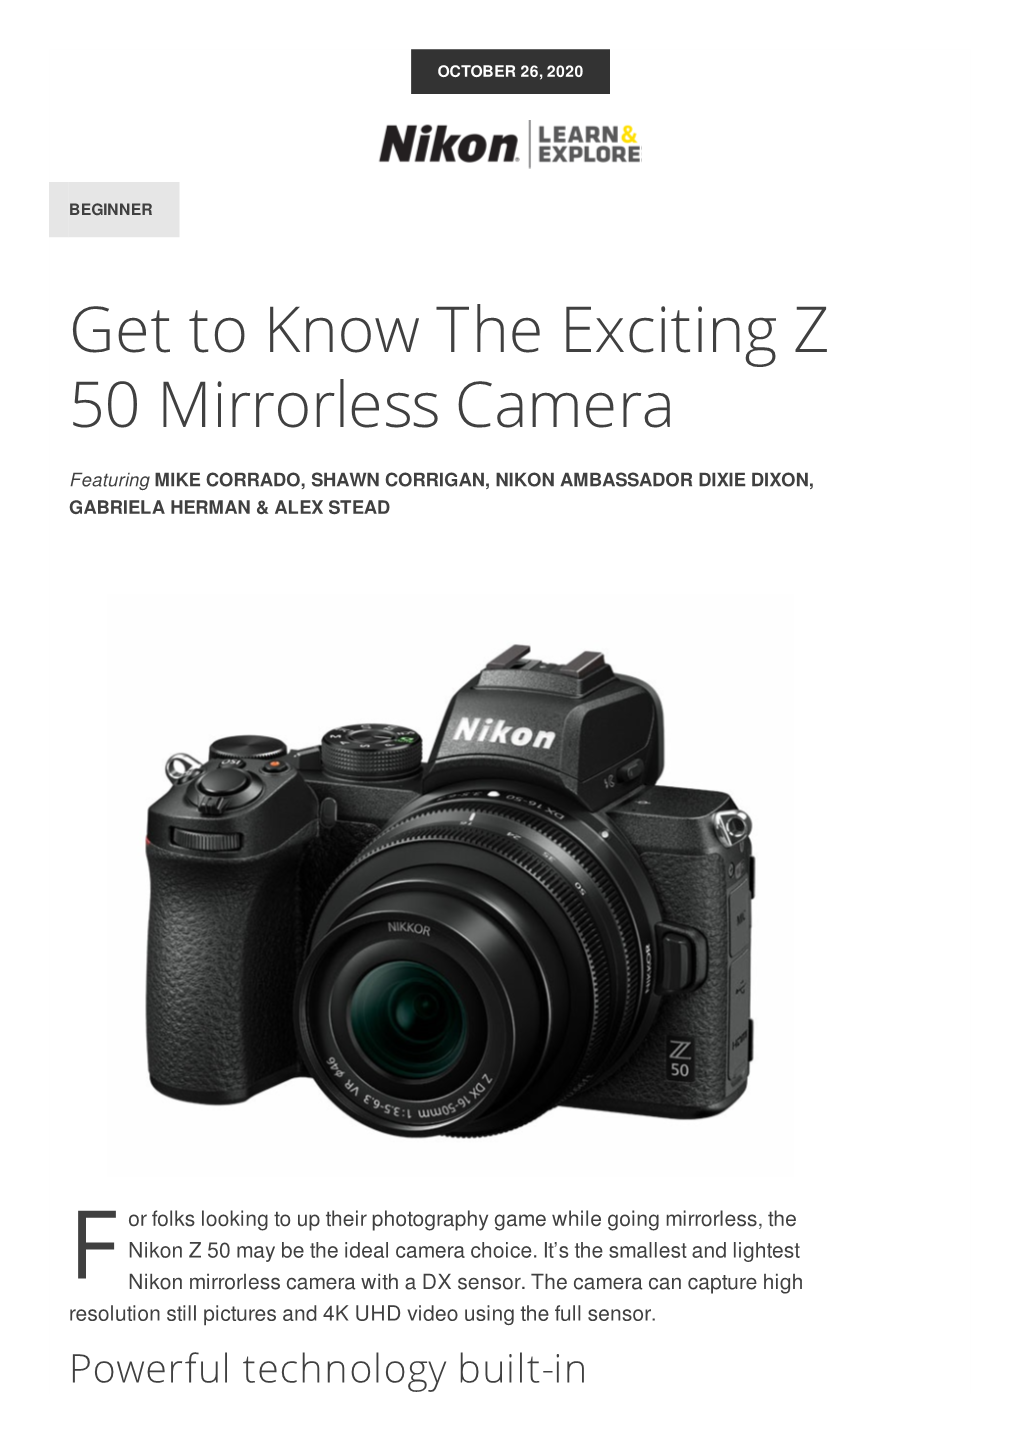 Get to Know the Exciting Z 50 Mirrorless Camera